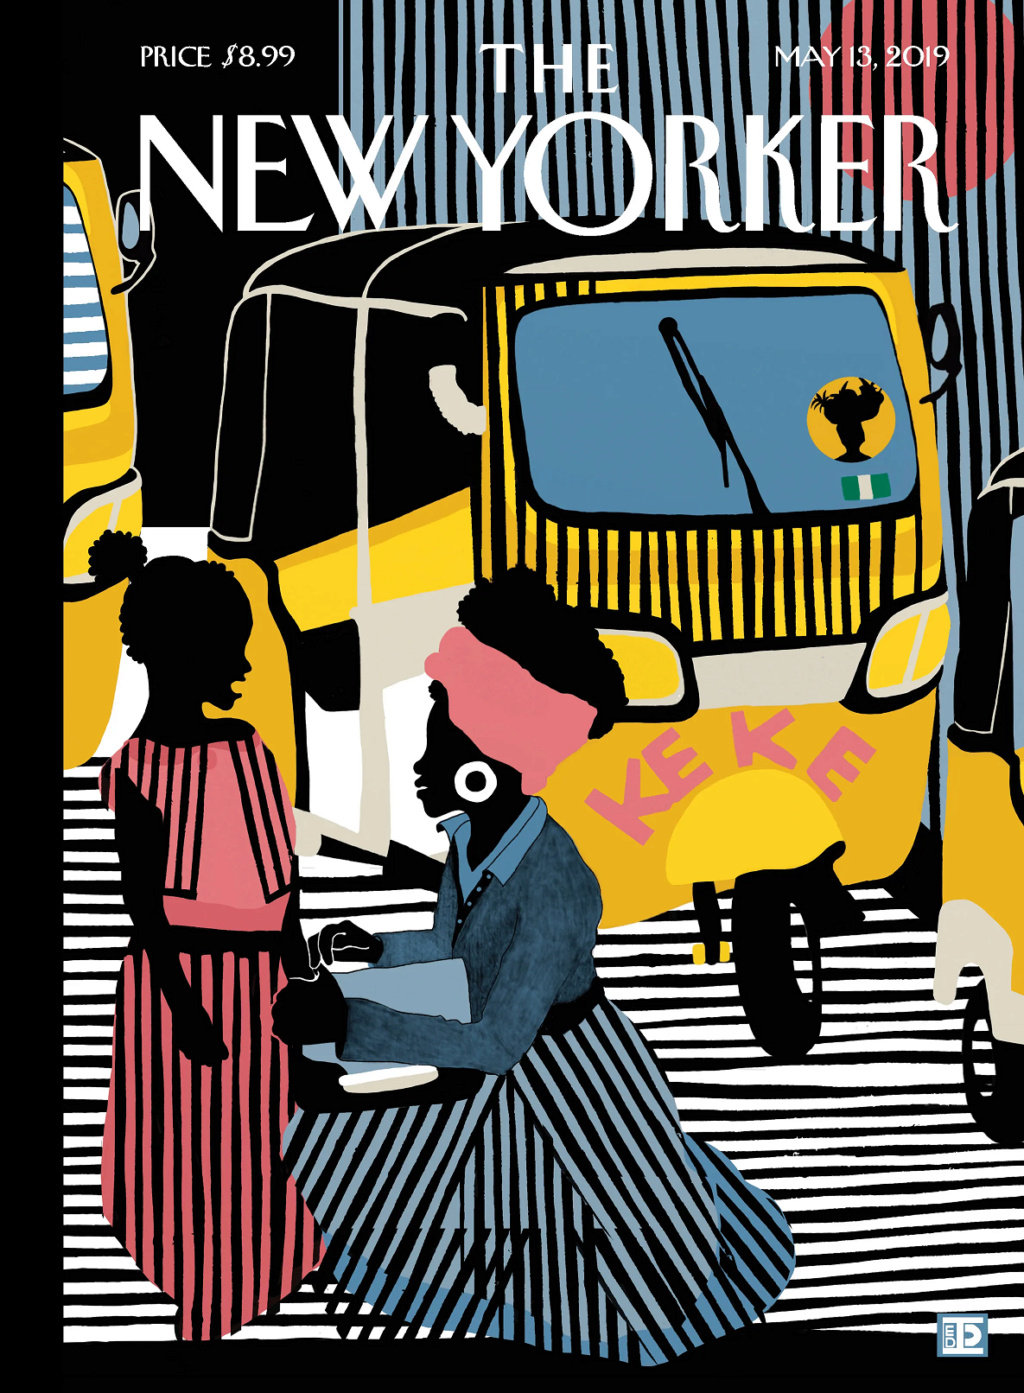 The New Yorker : Les couvertures - Page 3 Diana_12